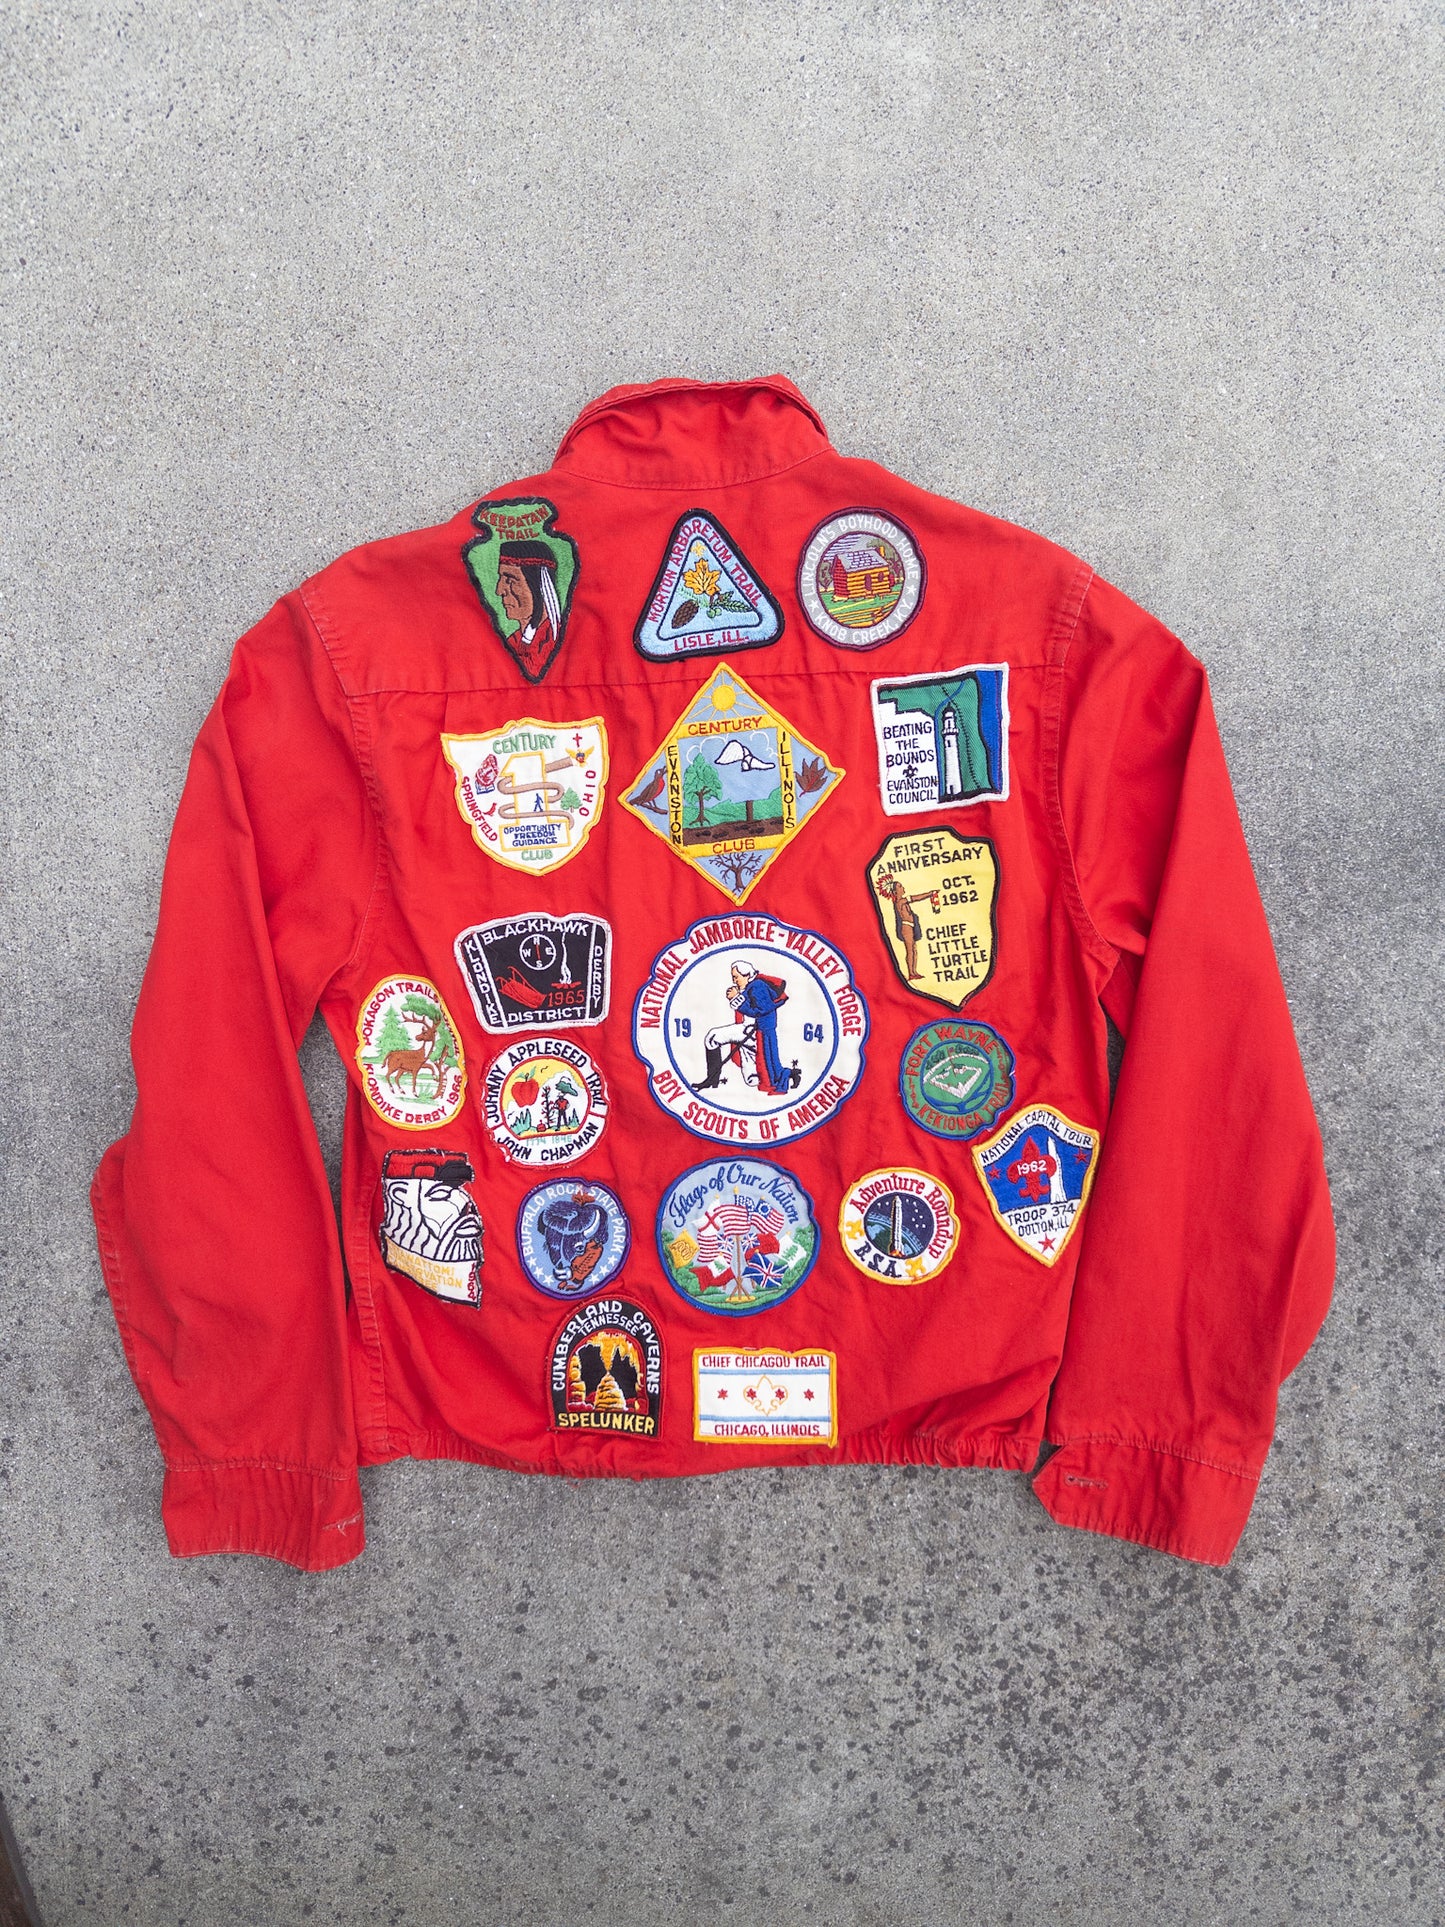 Vintage 1960s Boy Scouts of America Red Patches Jacket